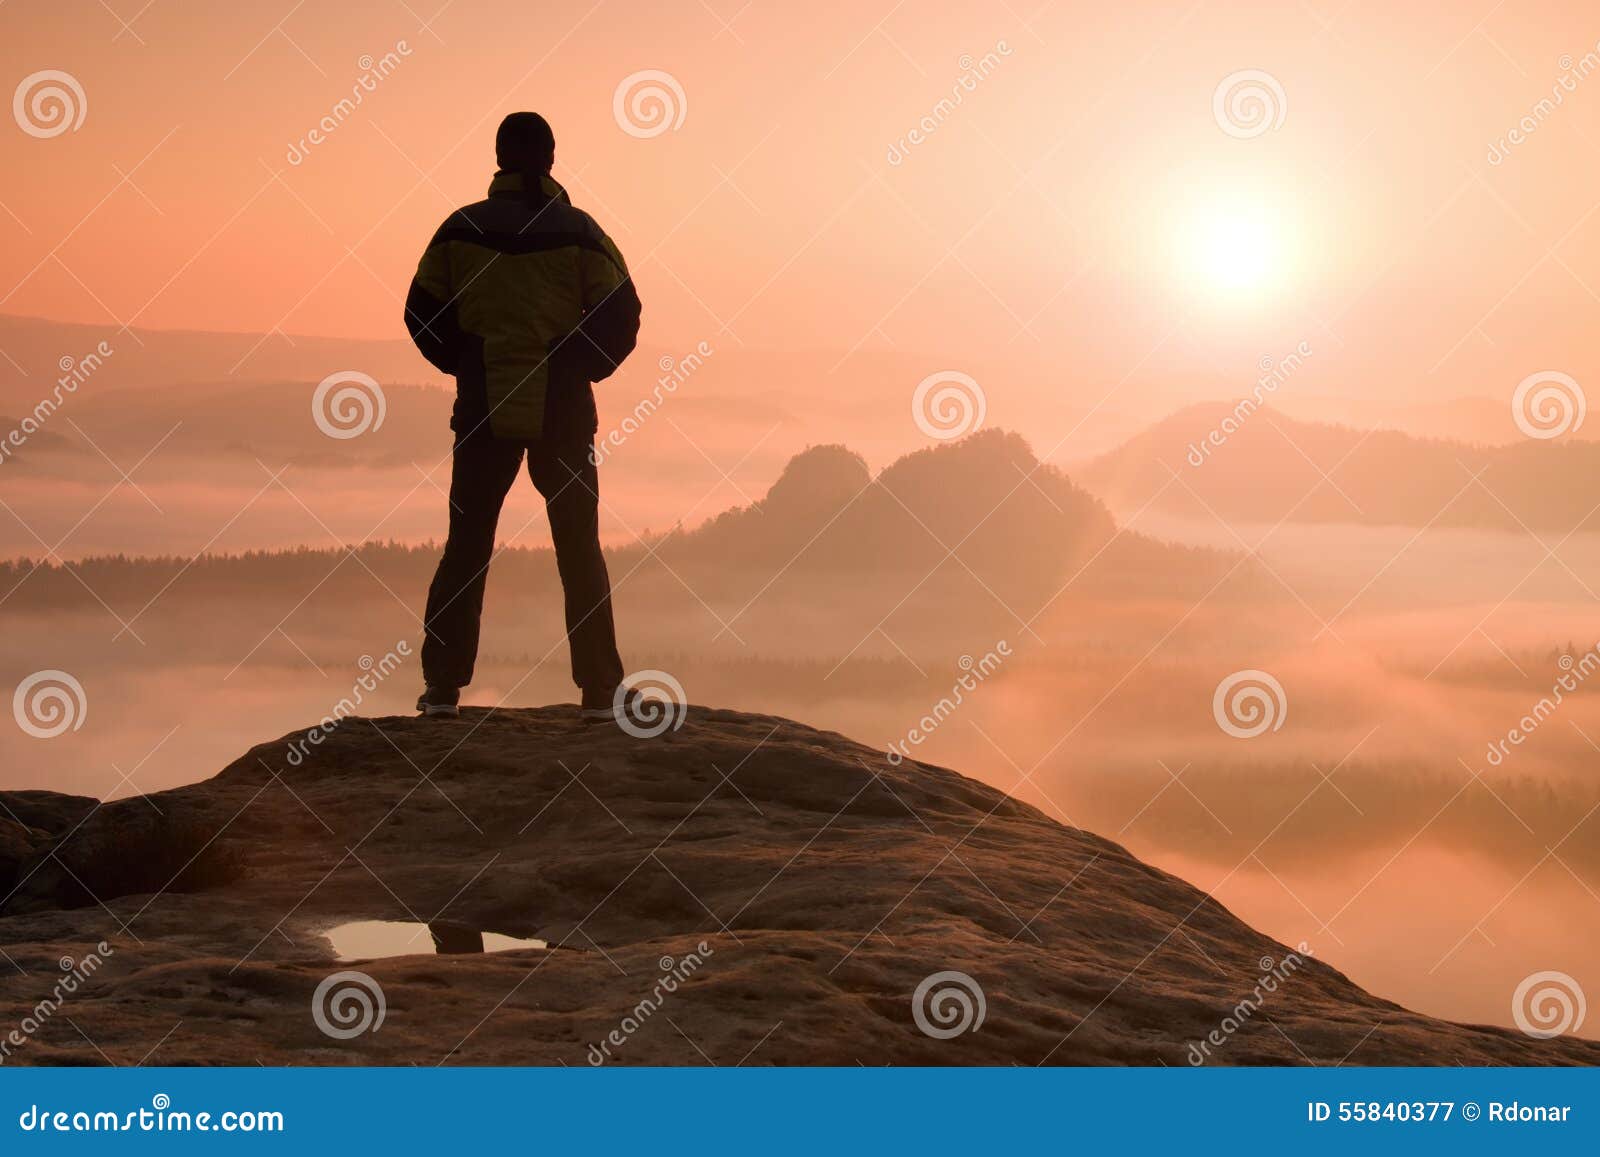 alone hiker standing on top of a mountain and enjoying sunrise